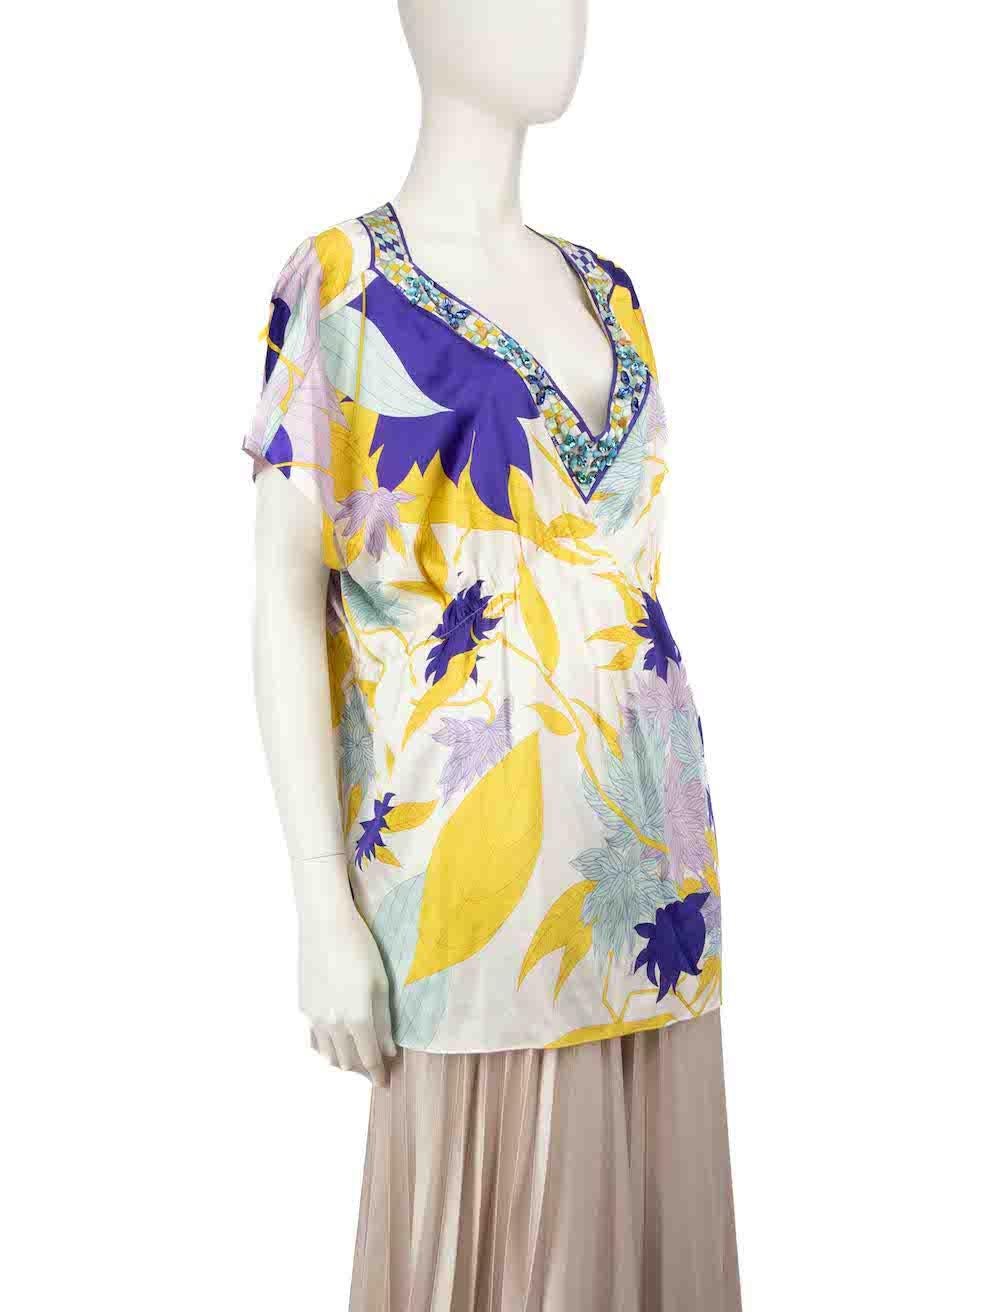 CONDITION is Very good. Minimal wear to top is evident. Minimal wear to the front is seen with few discolouration marks on this used Emilio Pucci designer resale item.
 
 
 
 Details
 
 
 Multicolour- white, blue, yellow
 
 Silk
 
 Top
 
 Short